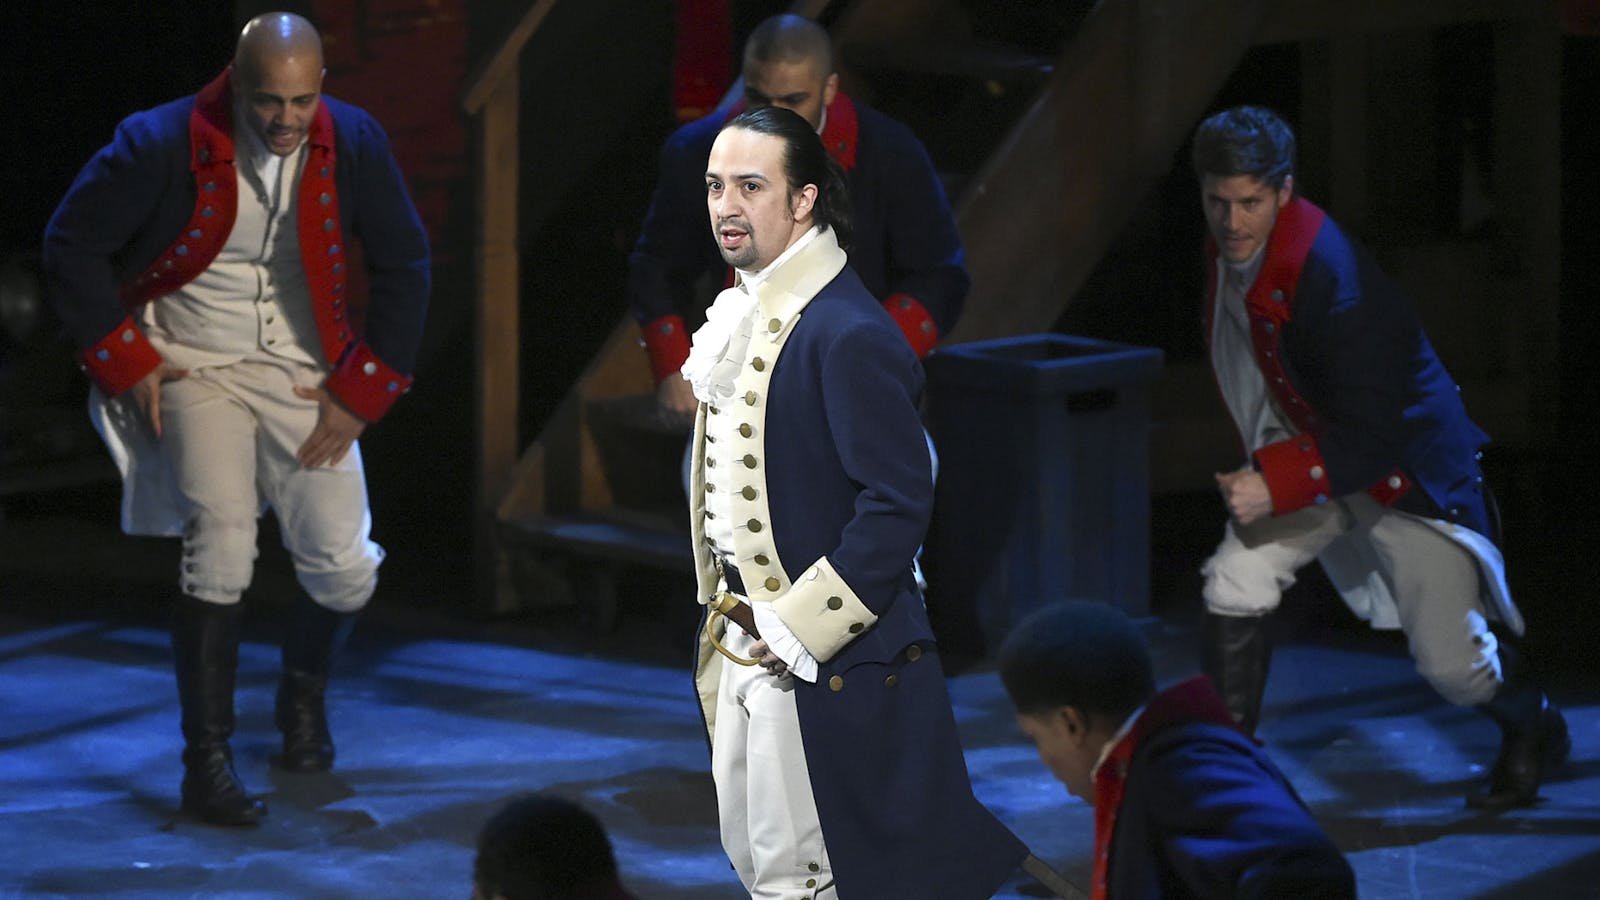 Disney will bring a movie version of "Hamilton" to Disney+ in July. Photo by AP